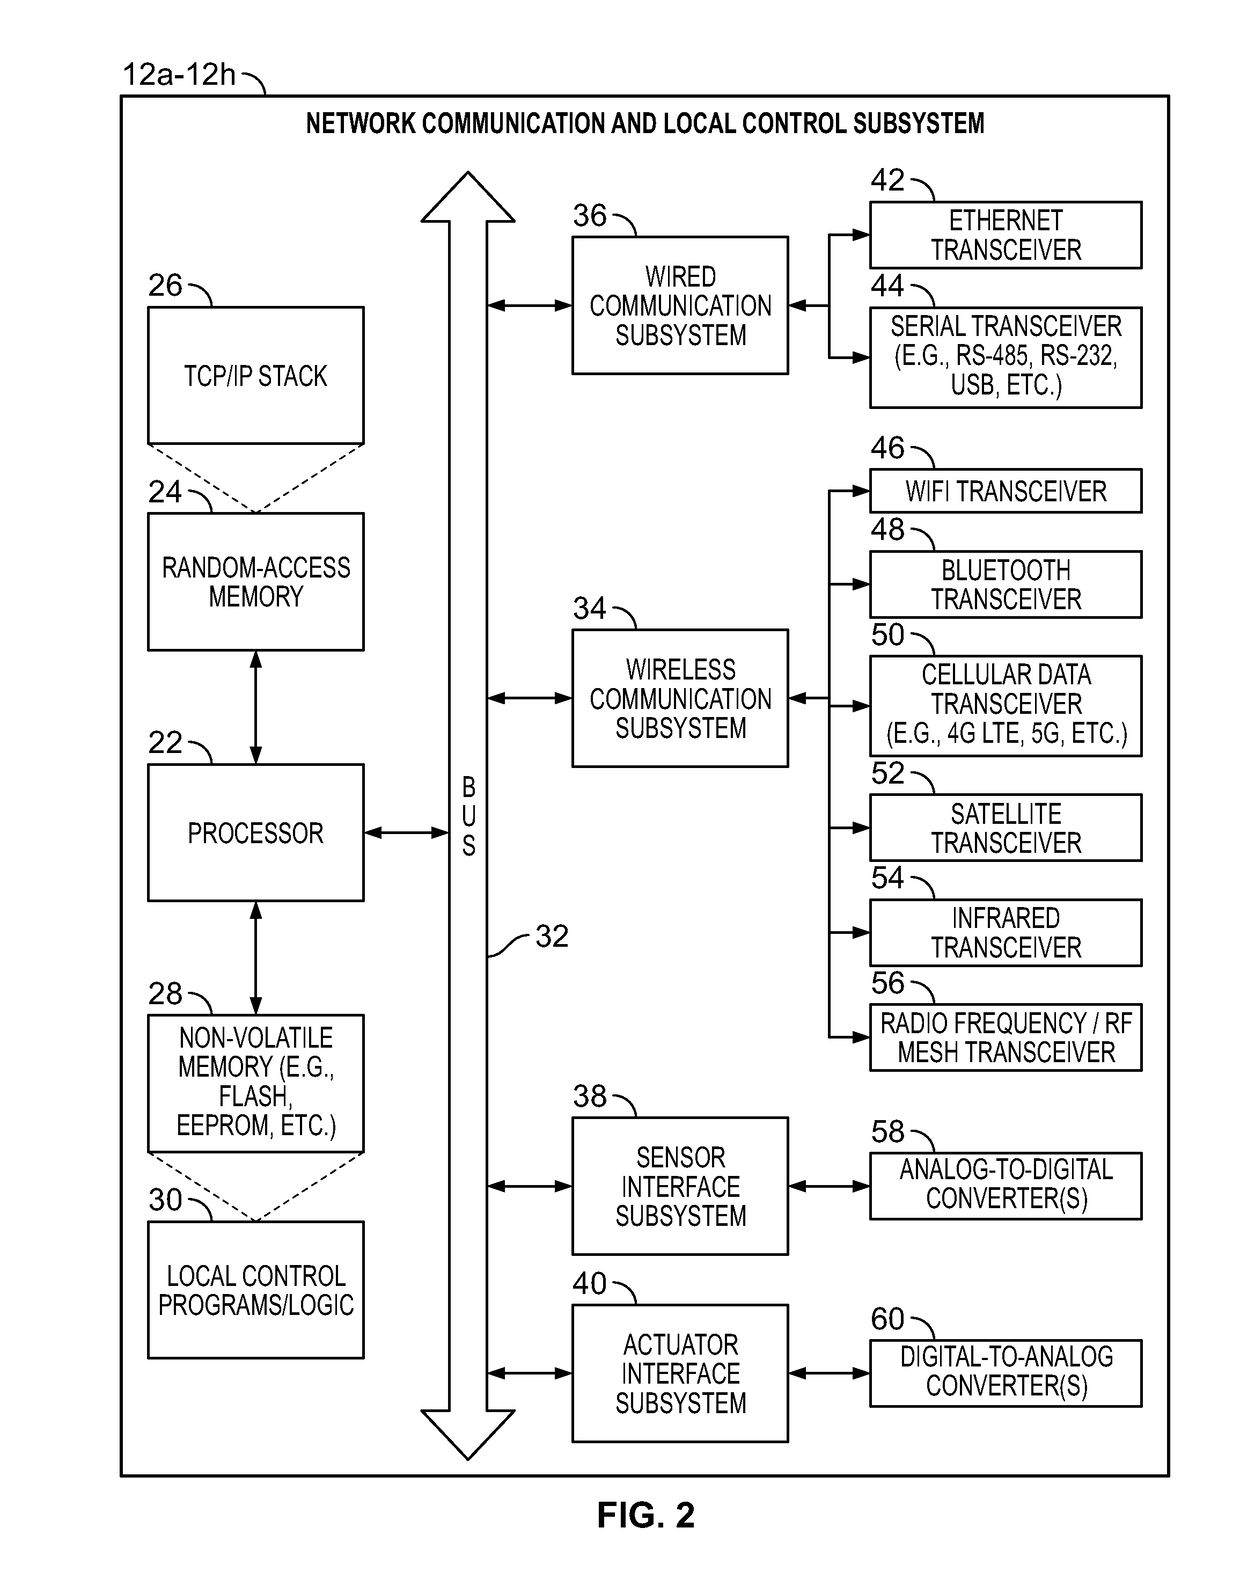 Systems and Methods for Providing Network Connectivity and Remote Monitoring, Optimization, and Control of Pool/Spa Equipment